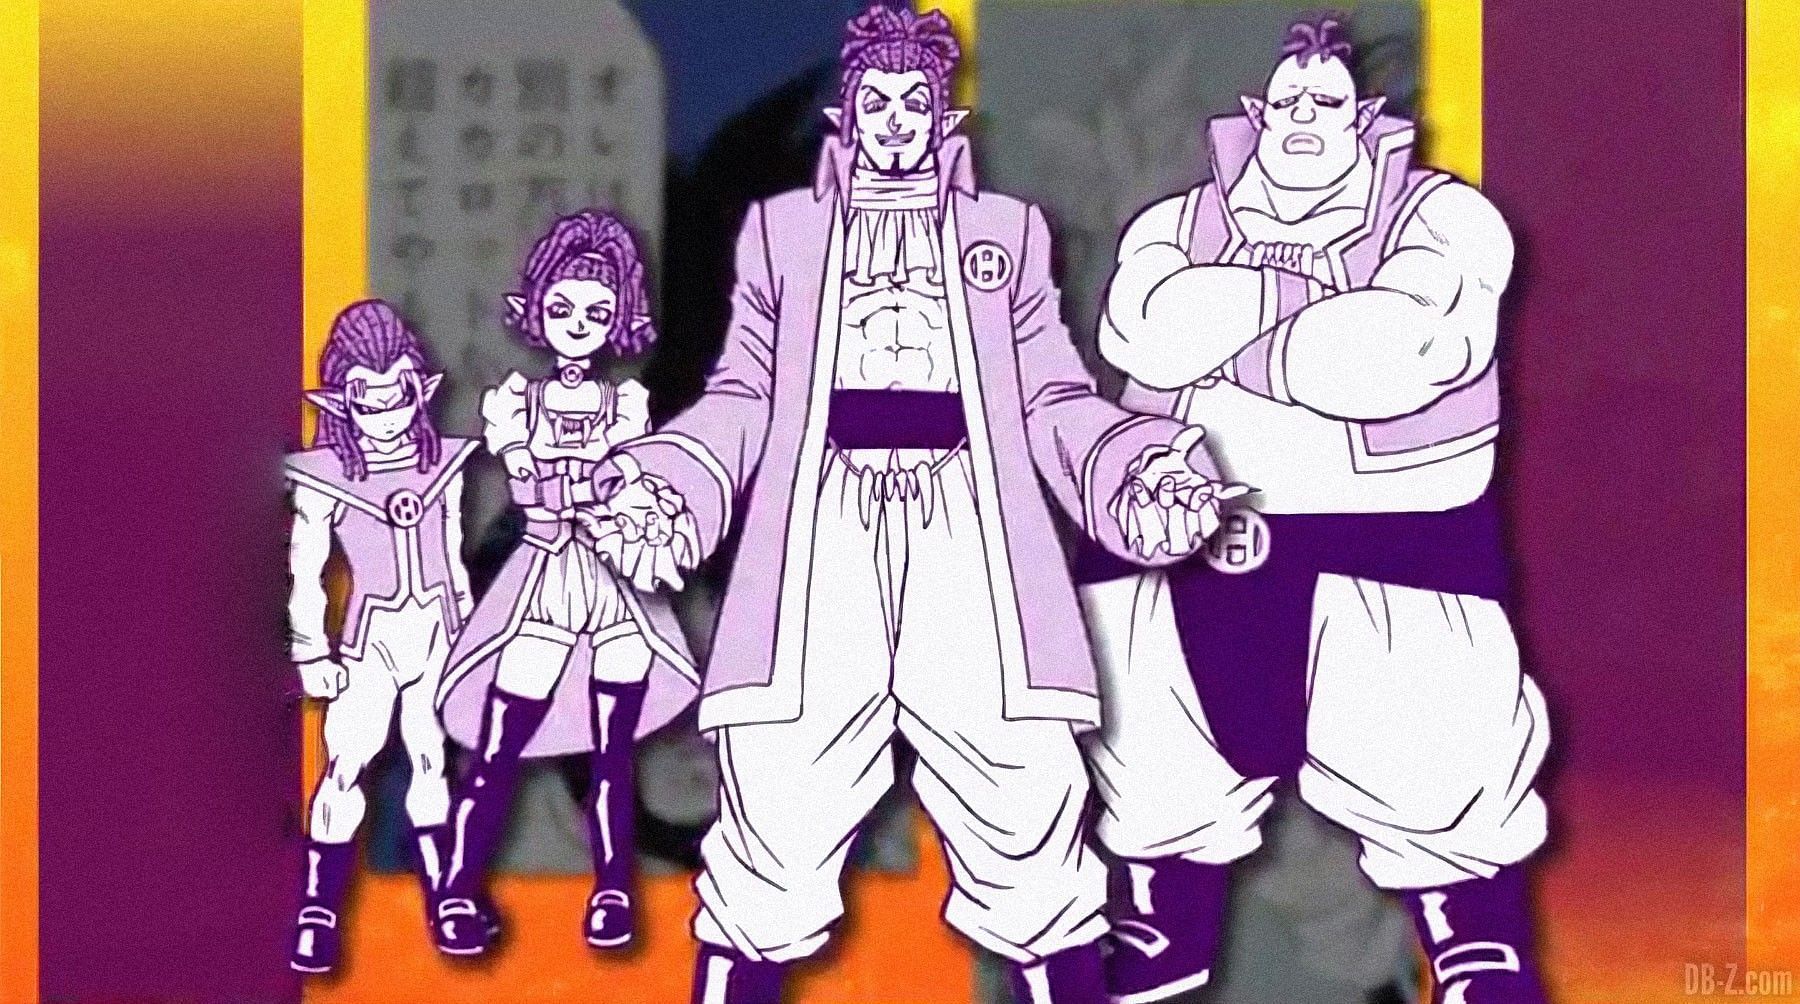 The Heeters as seen in the Dragon Ball Super manga. From left to right, their names are Gas, Macki, Elec, and Oil (Image via Shueisha)